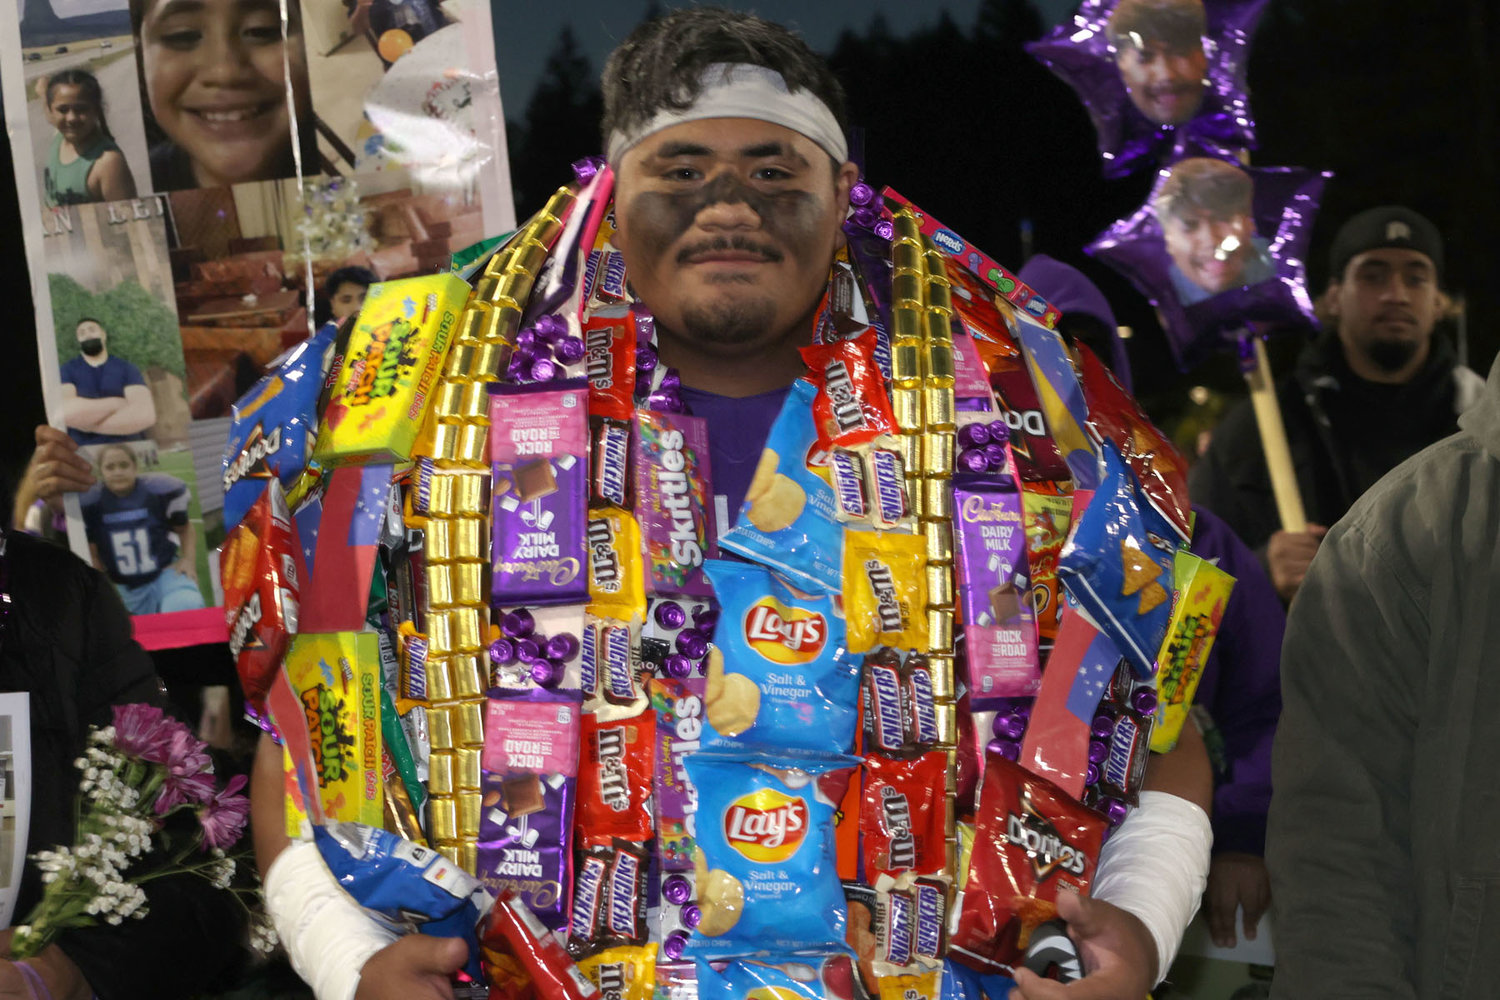 Future psychologist V.J Ioane dressed up with candy and chips. Analyze that!